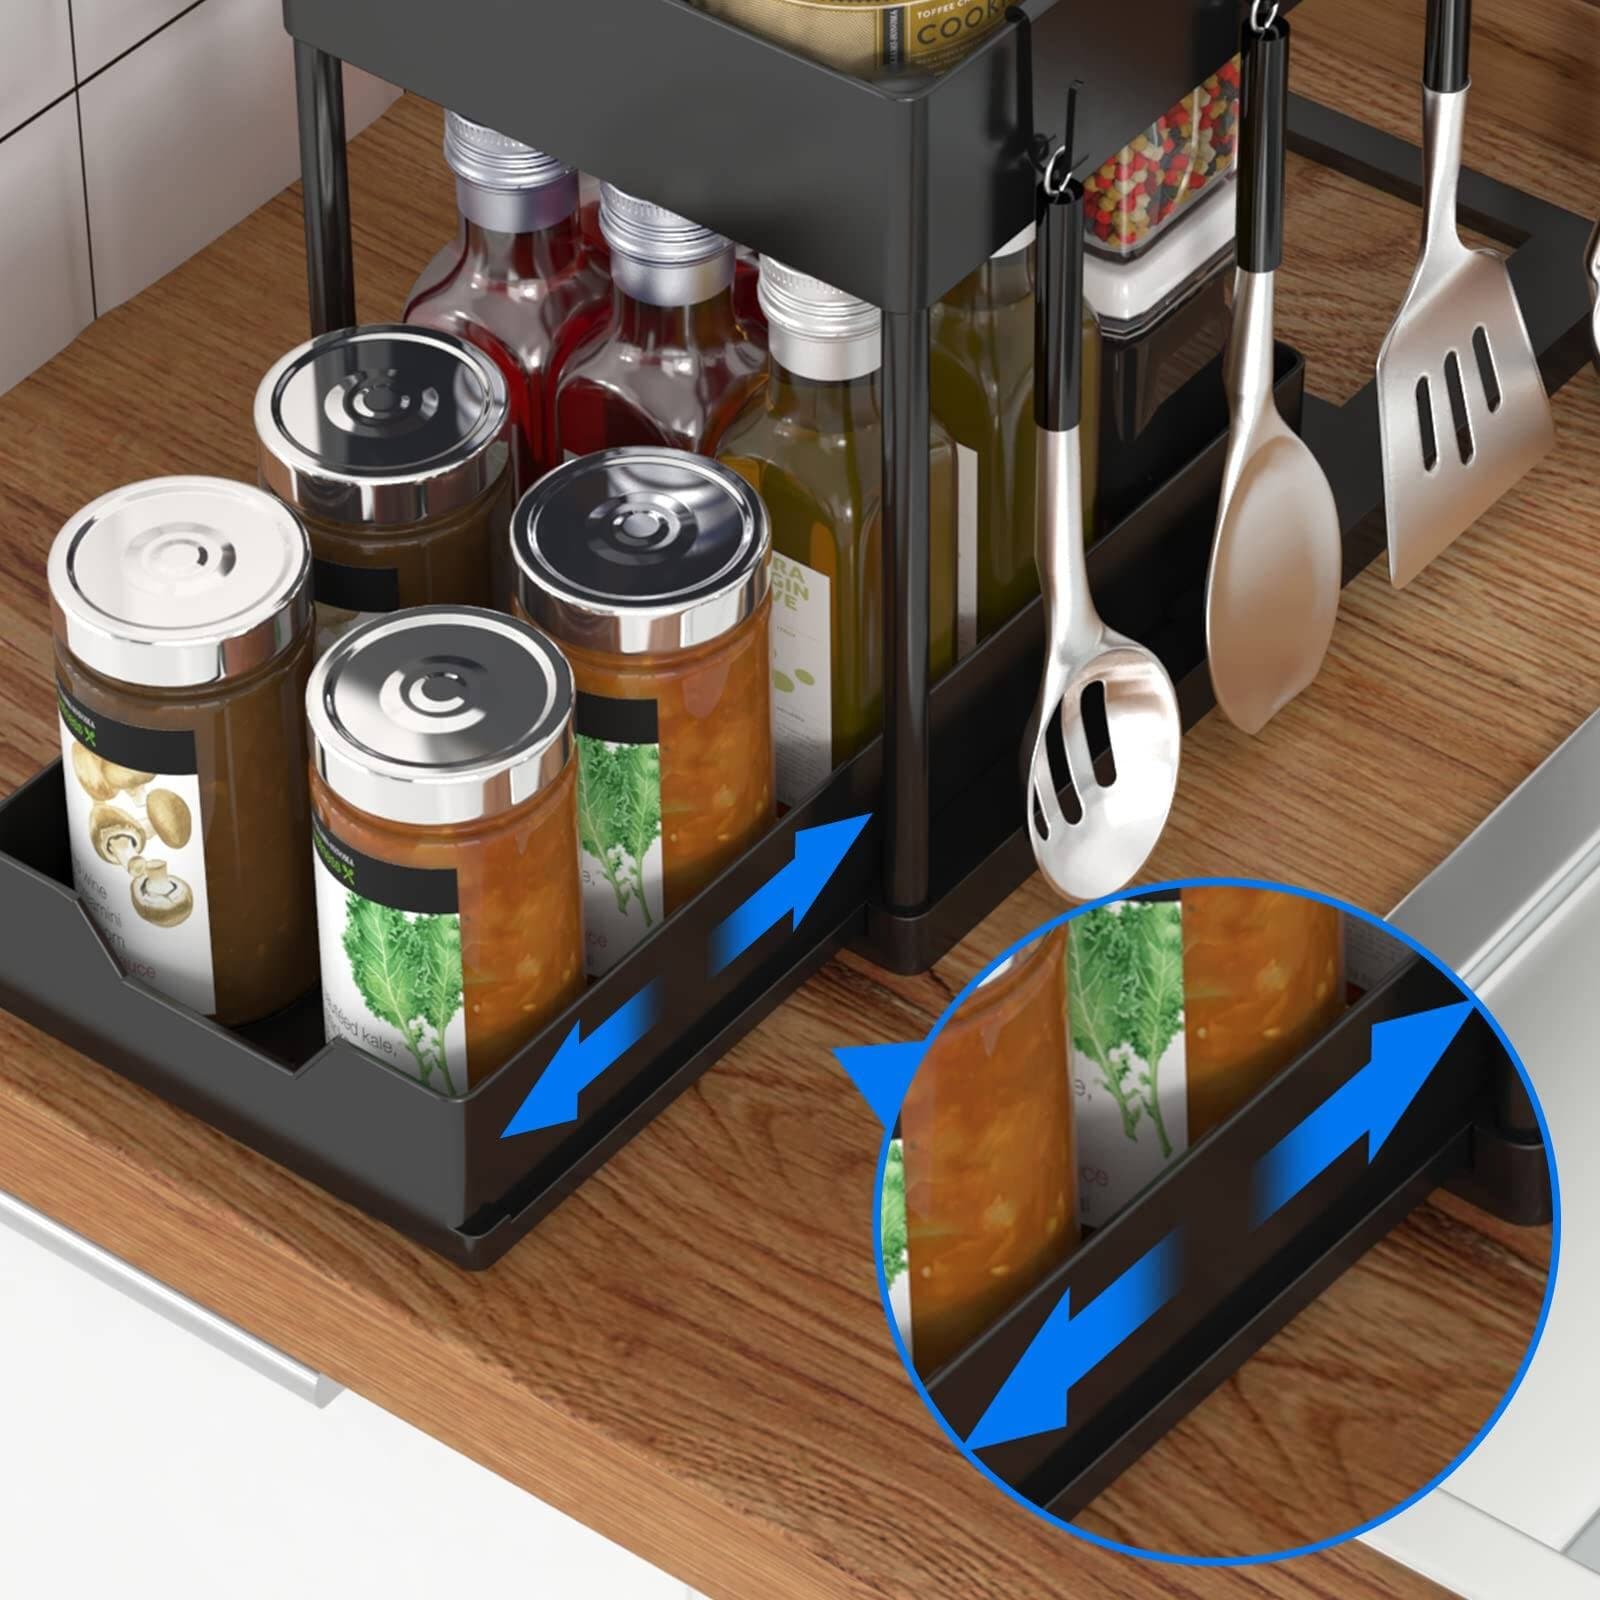 https://ak1.ostkcdn.com/images/products/is/images/direct/280aed8cd0b31f6aafccb1d31fd6356fd59a9d66/2-Tier-Under-Sink-Organizer-with-Pull-Out-Sliding-Storage-Drawer-%28Set-of-2%29.jpg